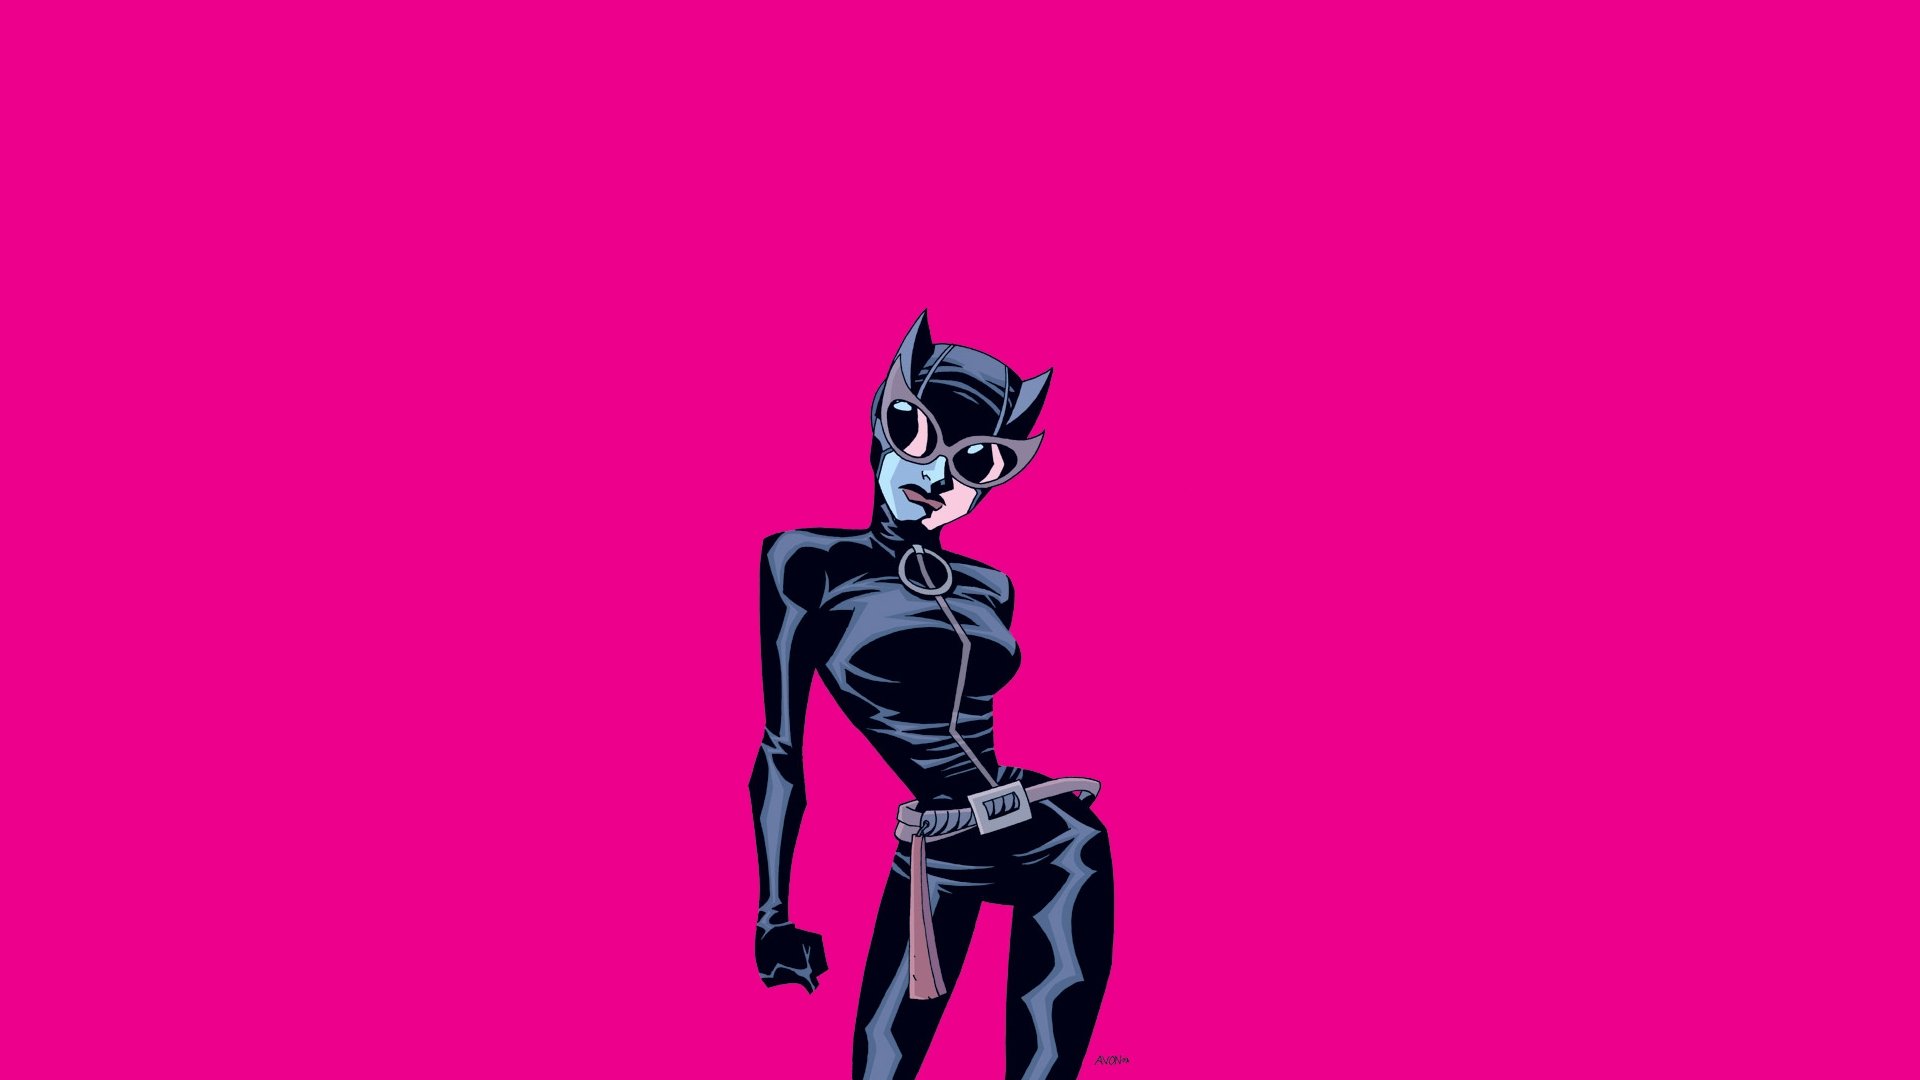 Download full hd 1920x1080 Catwoman PC background ID:81492 for free